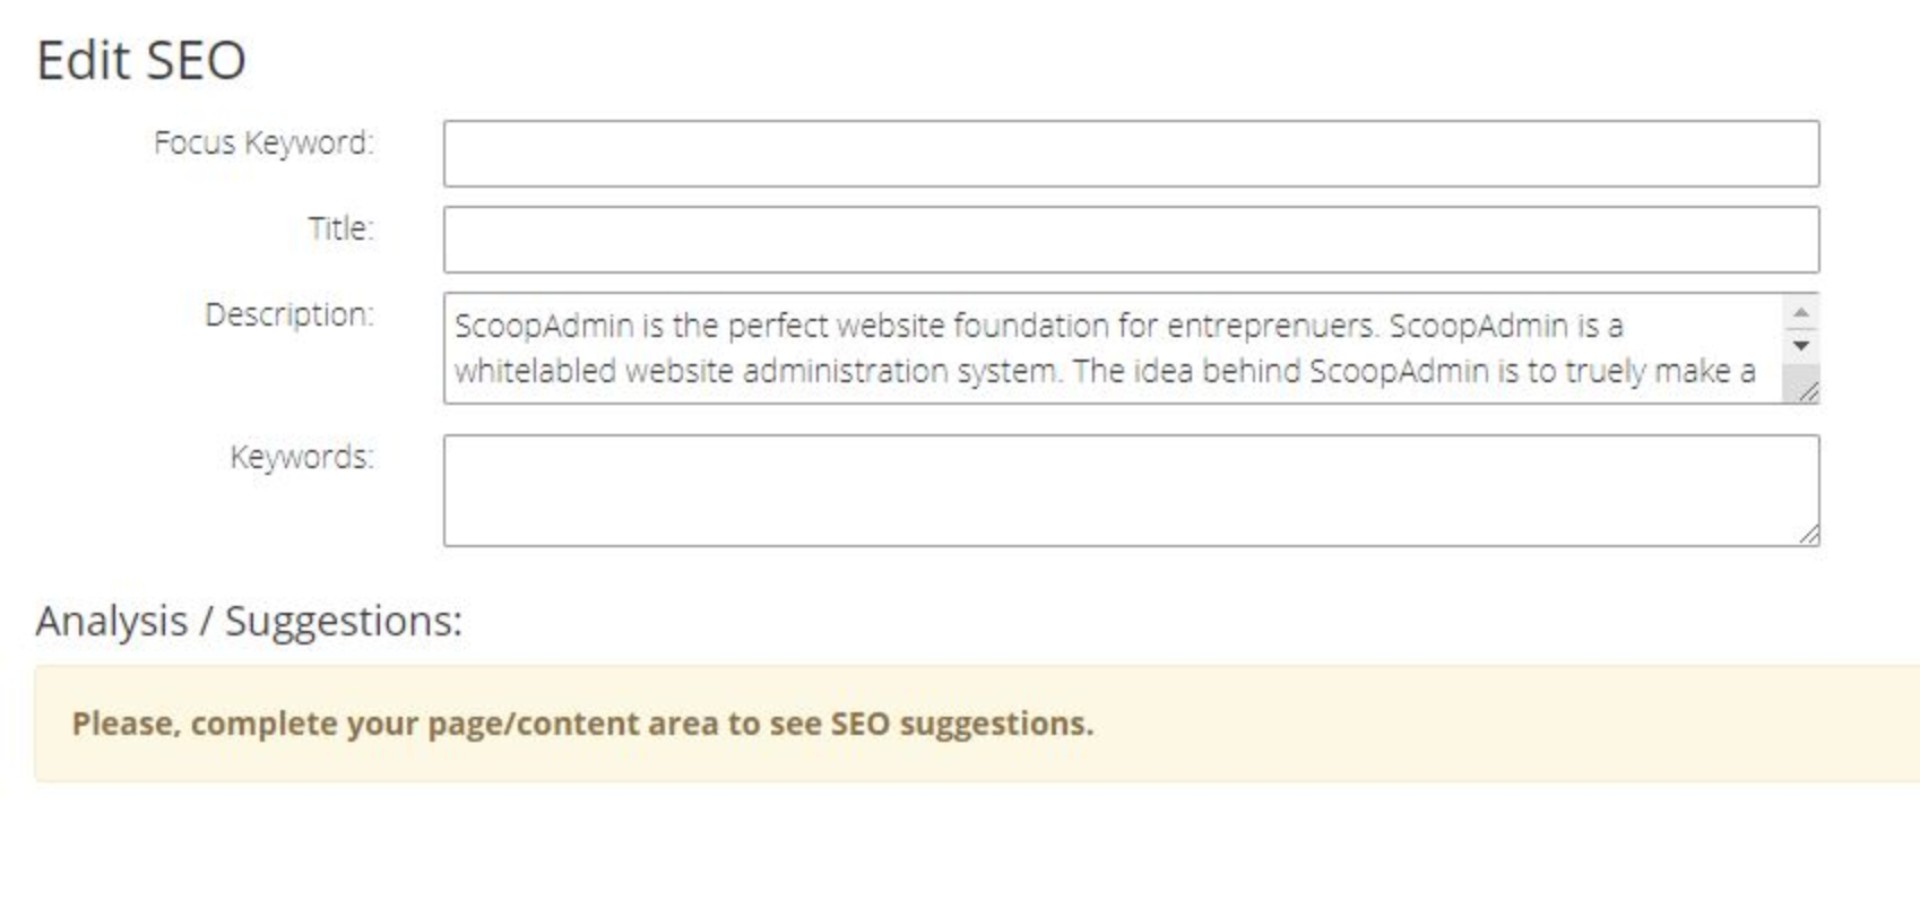 Image of SEO form in software.